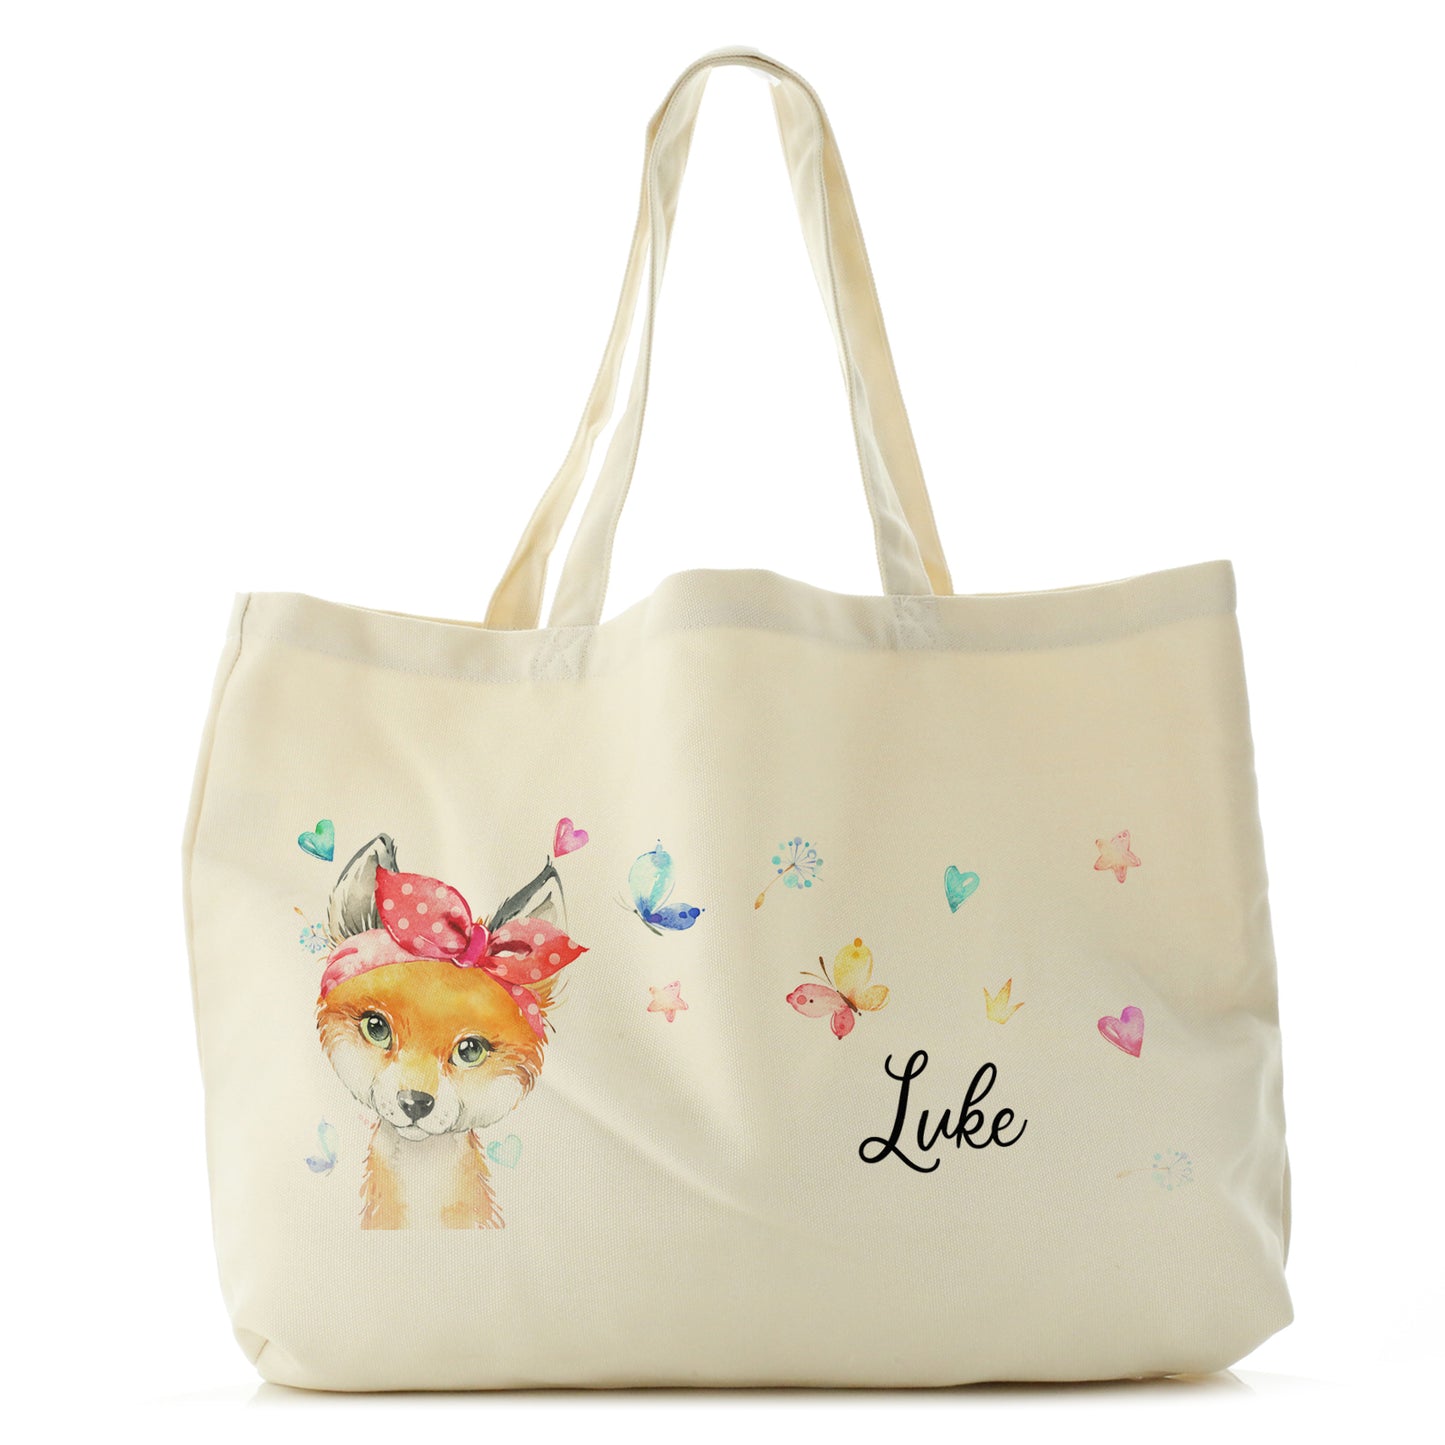 Personalised Canvas Tote Bag with Red Fox with Hearts Dandelion Butterflies and Cute Text